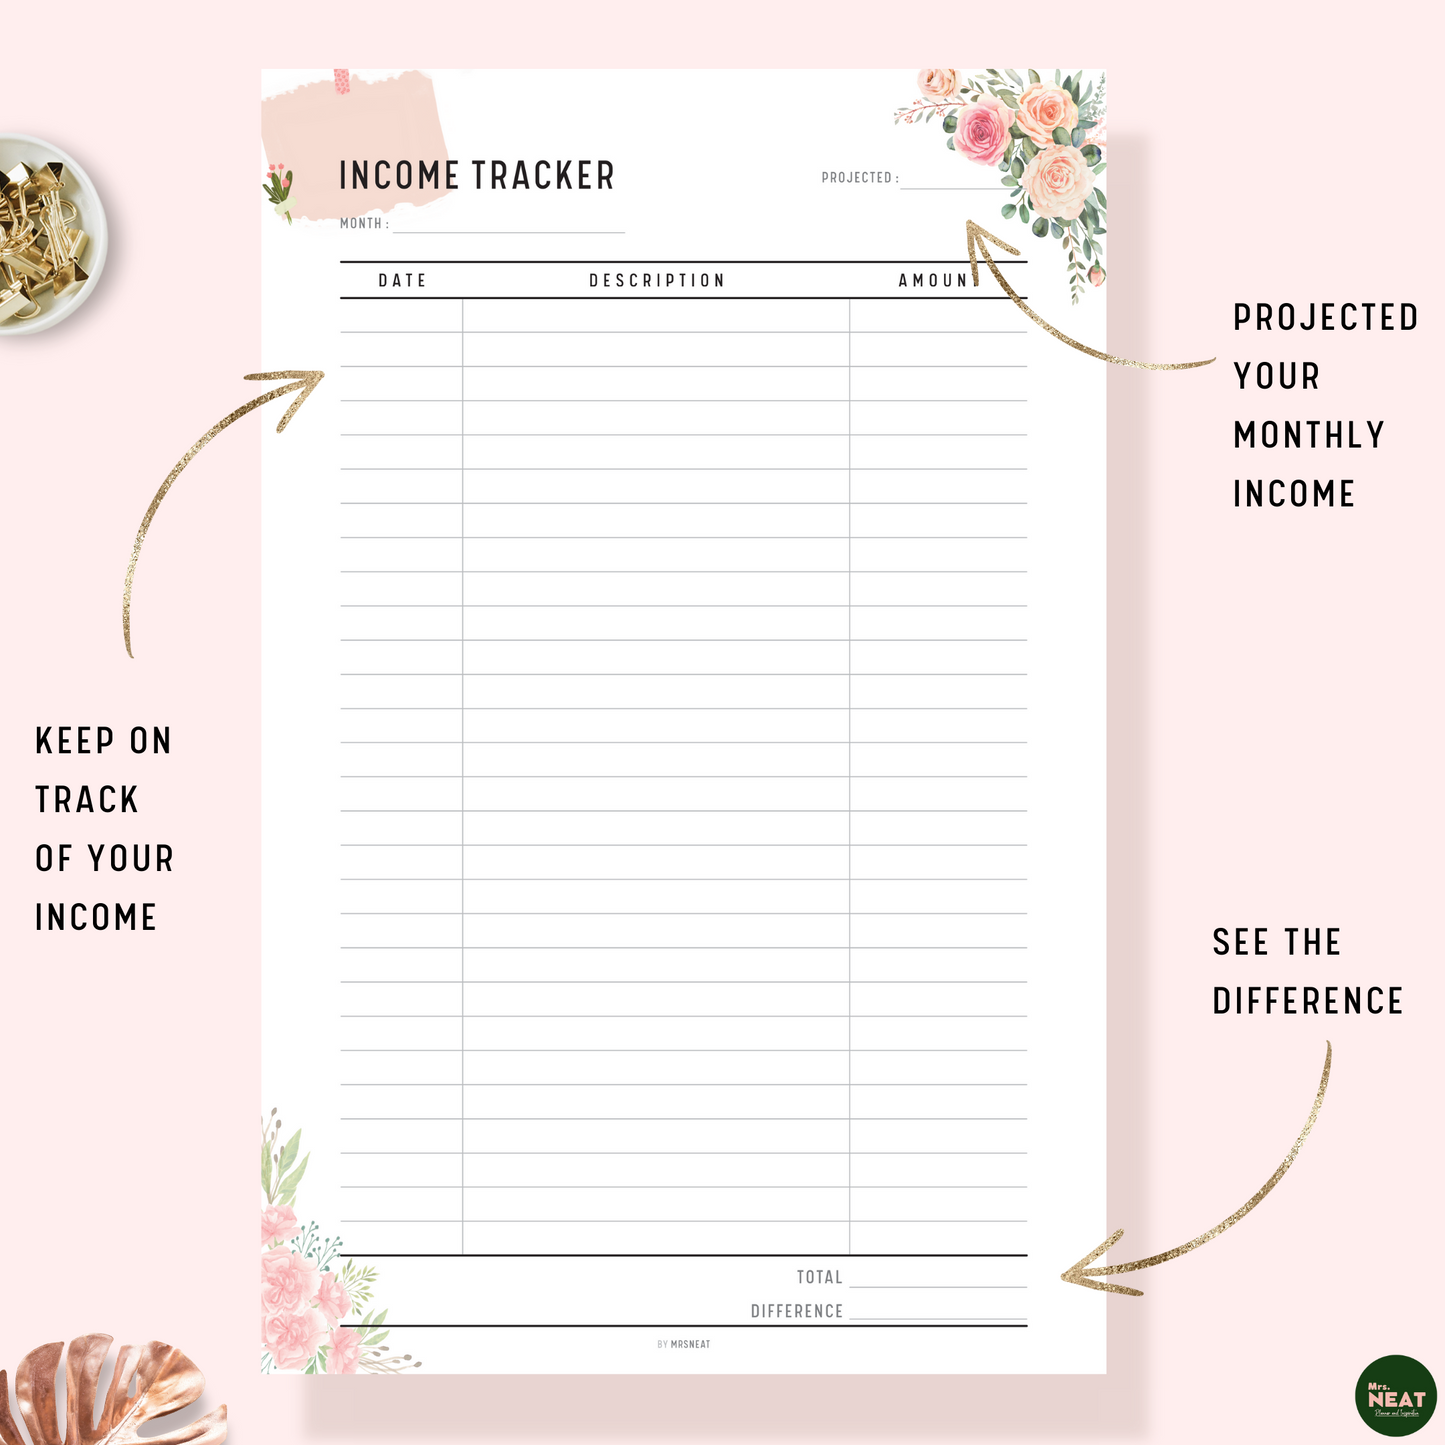 Floral Income Tracker Planner with room for monthly projected, actual incomes, total and differences